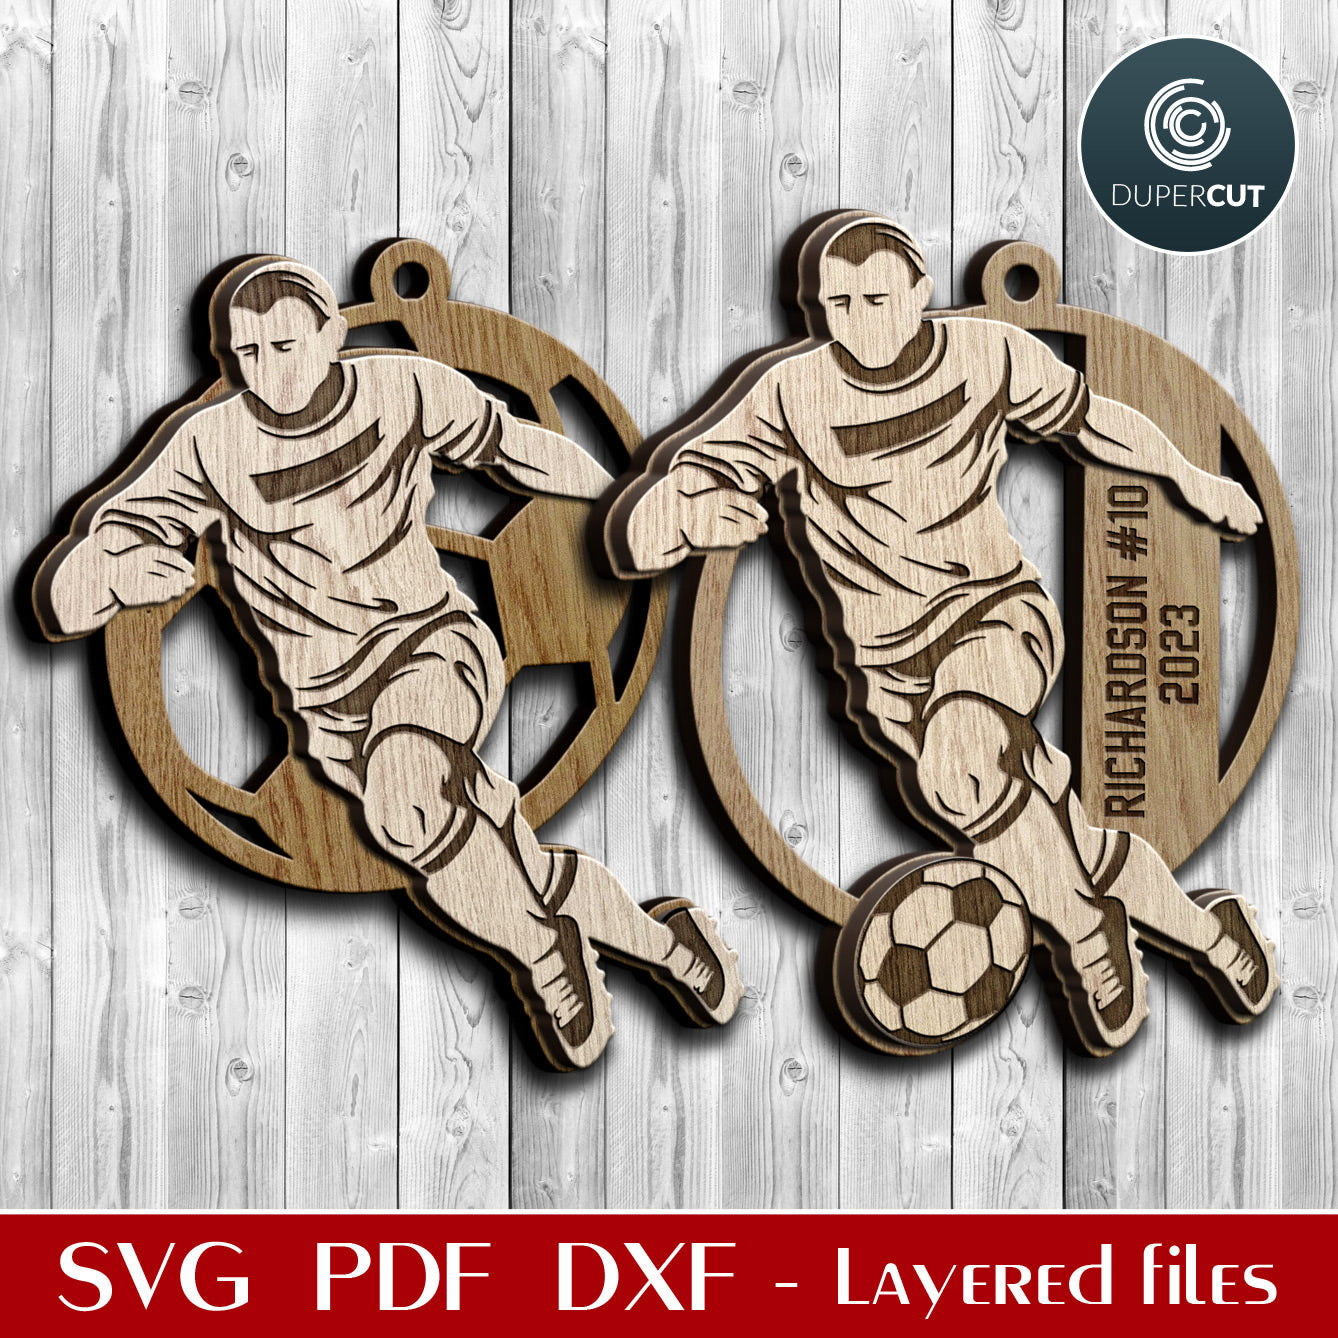 Soccer / football player ornaments layered cut files template, Christmas tree decoration SVG files for Glowforge, Xtool, CNC laser machines, Cricut, by www.DuperCut.com